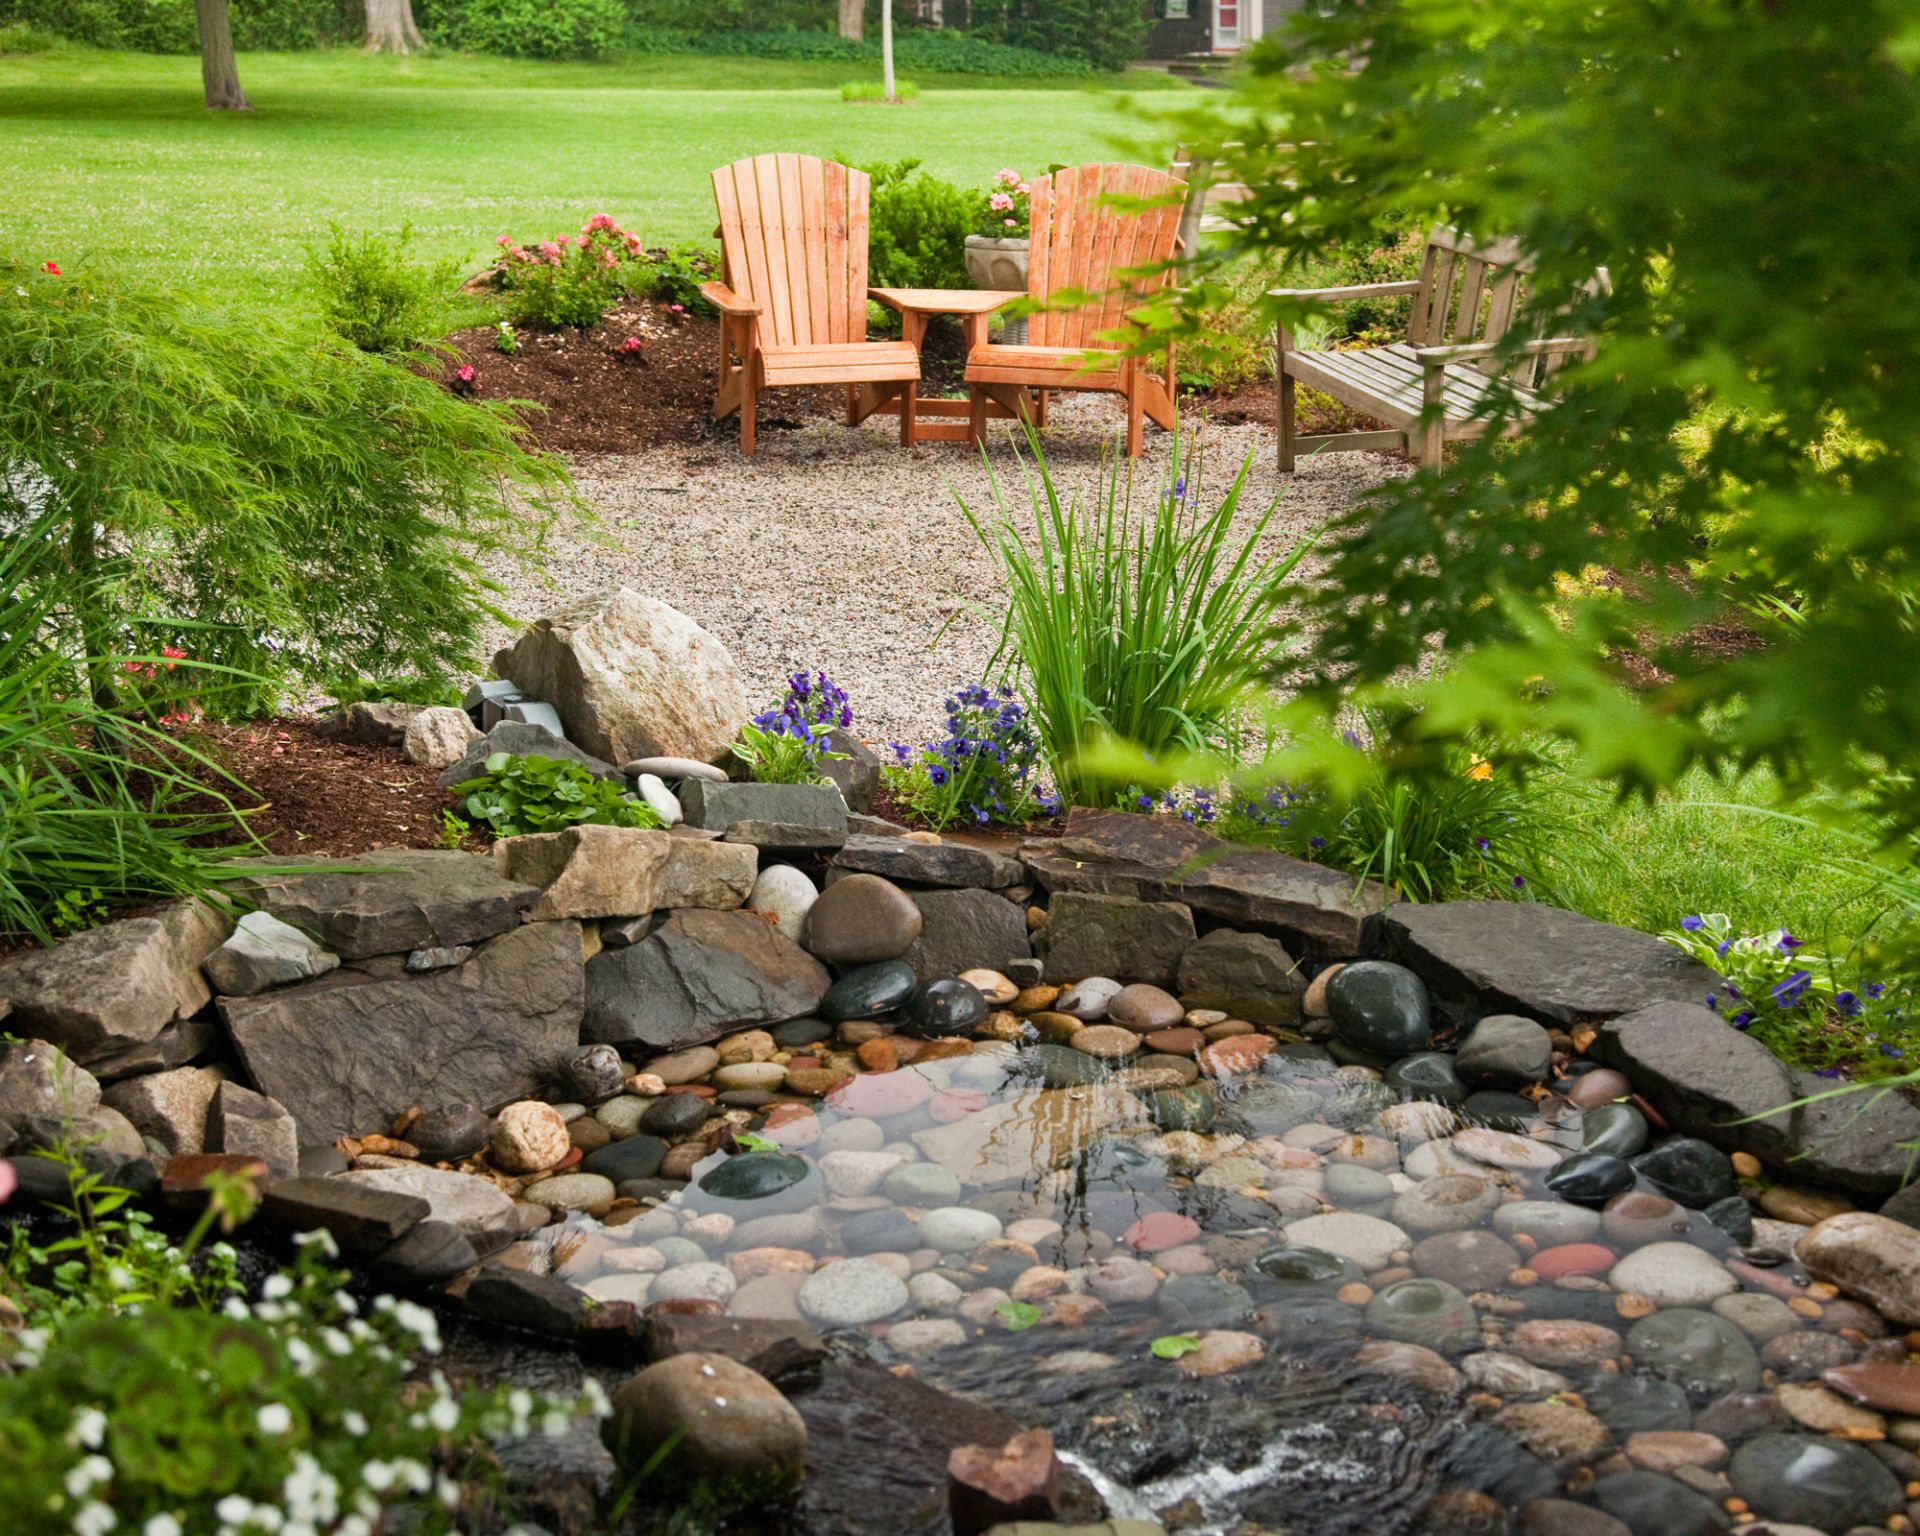 Cheap landscaping ideas: 16 ways to transform your backyard on a budget